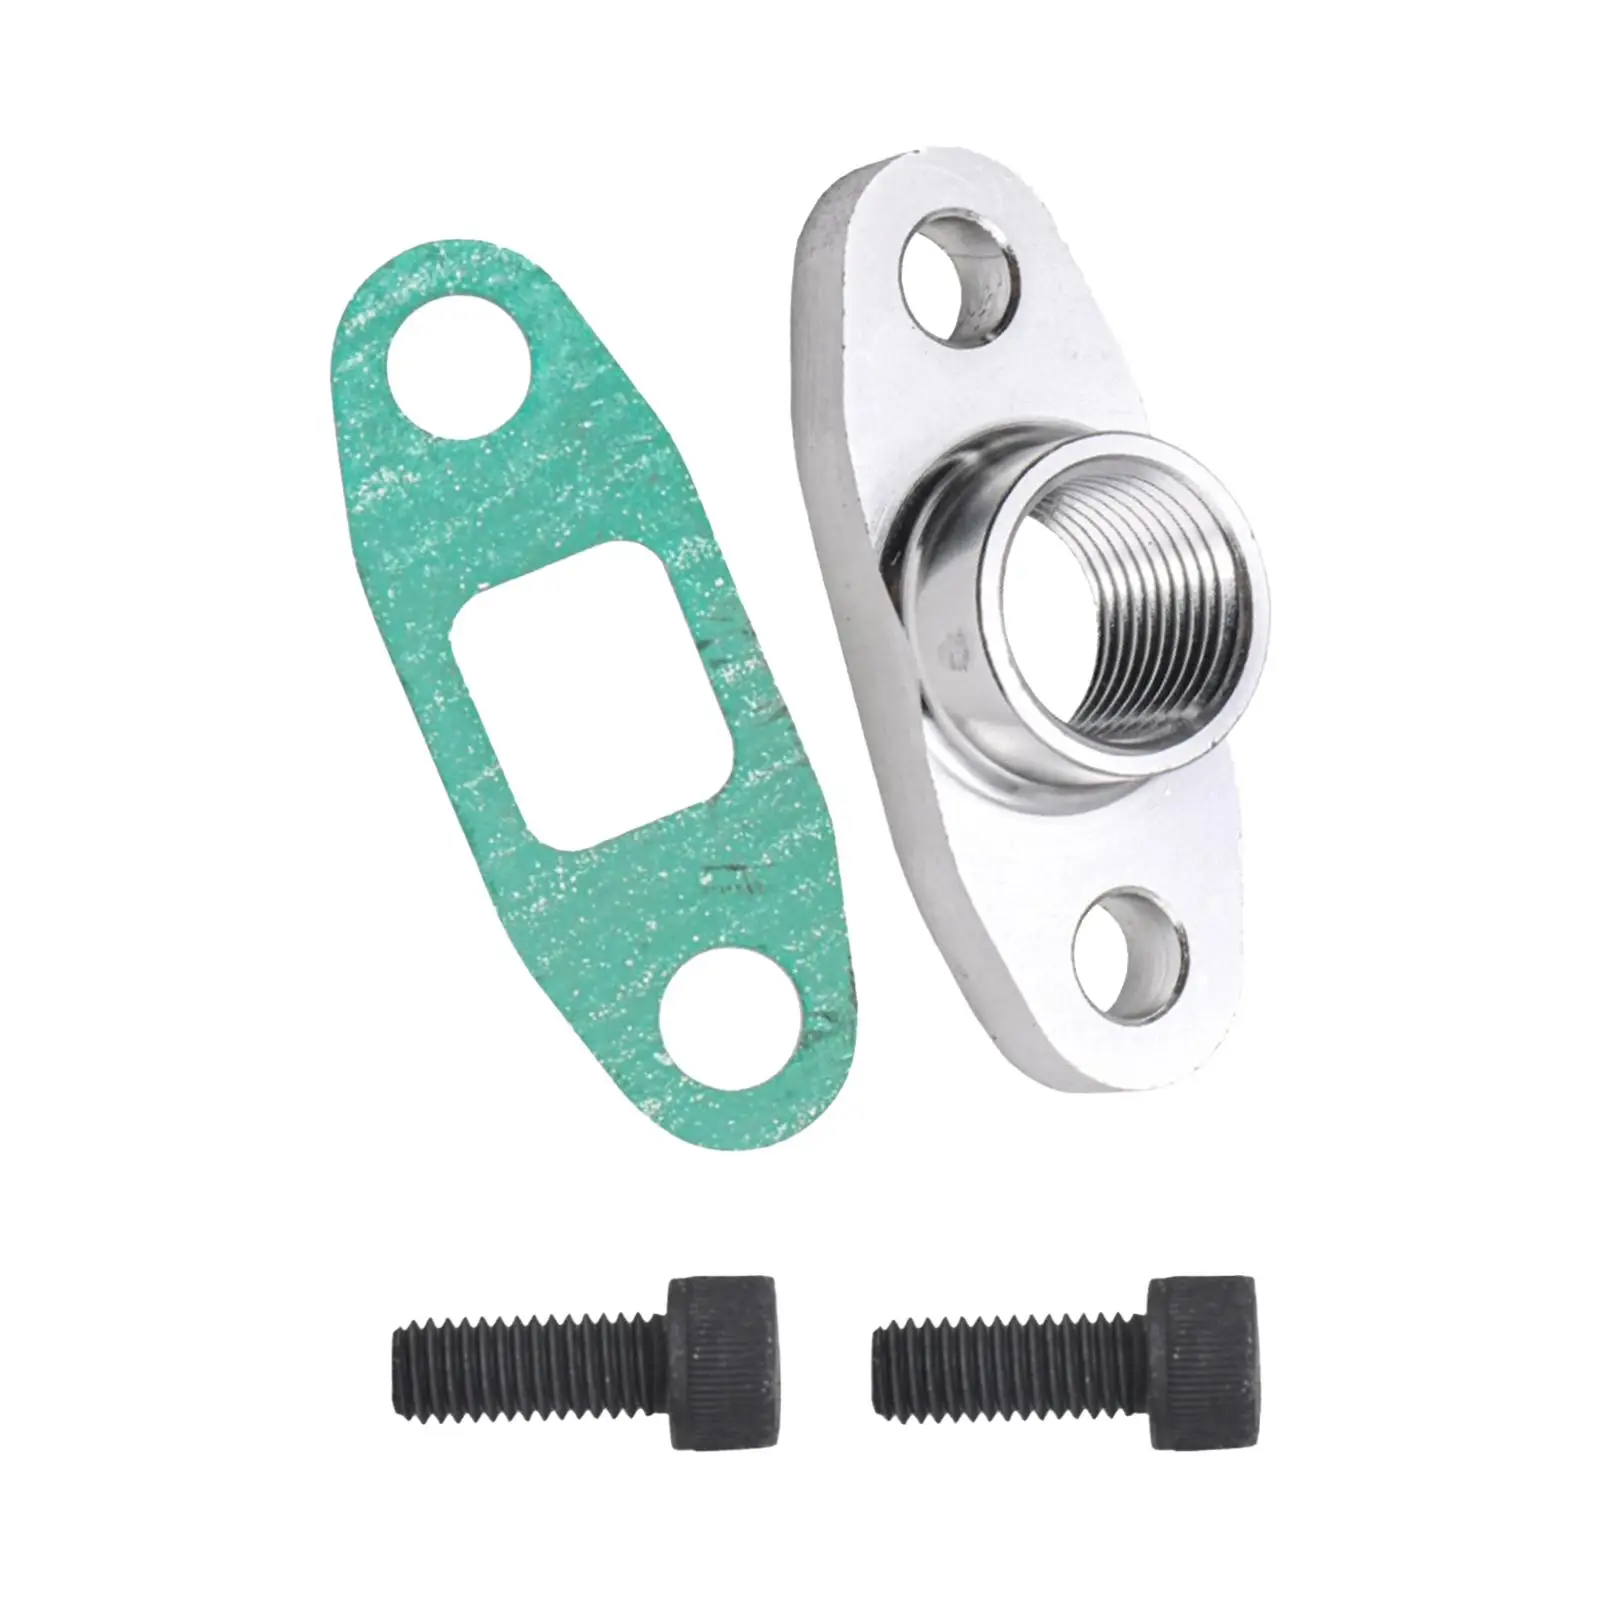 Oil Drain Outlet Flange Gasket Adapter Set ,Aluminum Alloy, Accessory Durable with Bolts 1/2